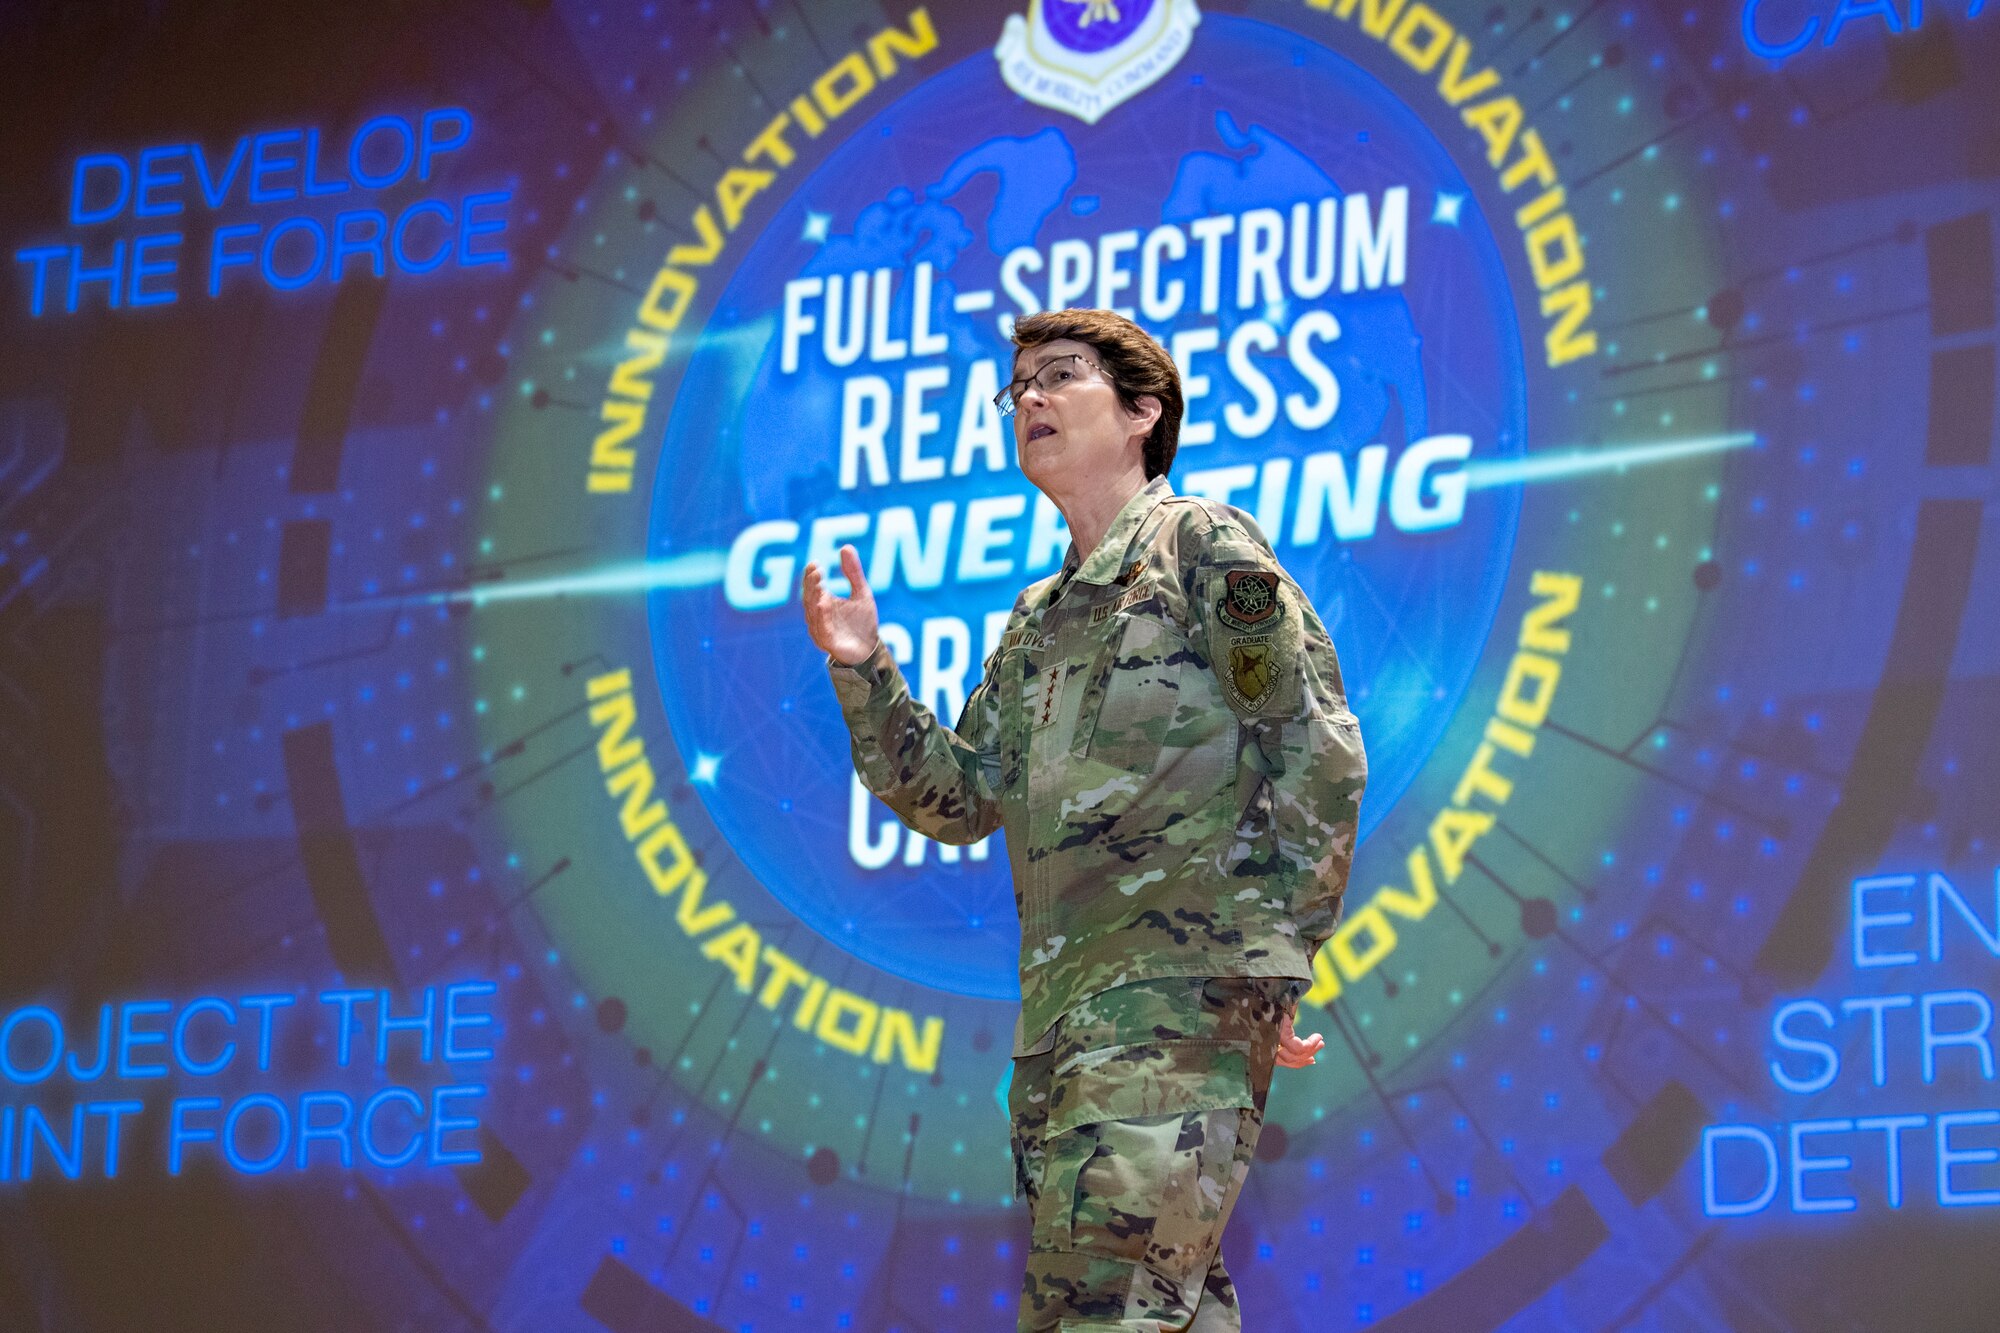 Gen. Jaqueline Van Ovost, the Air Mobility Command (AMC) commander speaks during a commander's call at MacDill Air Force Base, Fla., April 28, 2021.